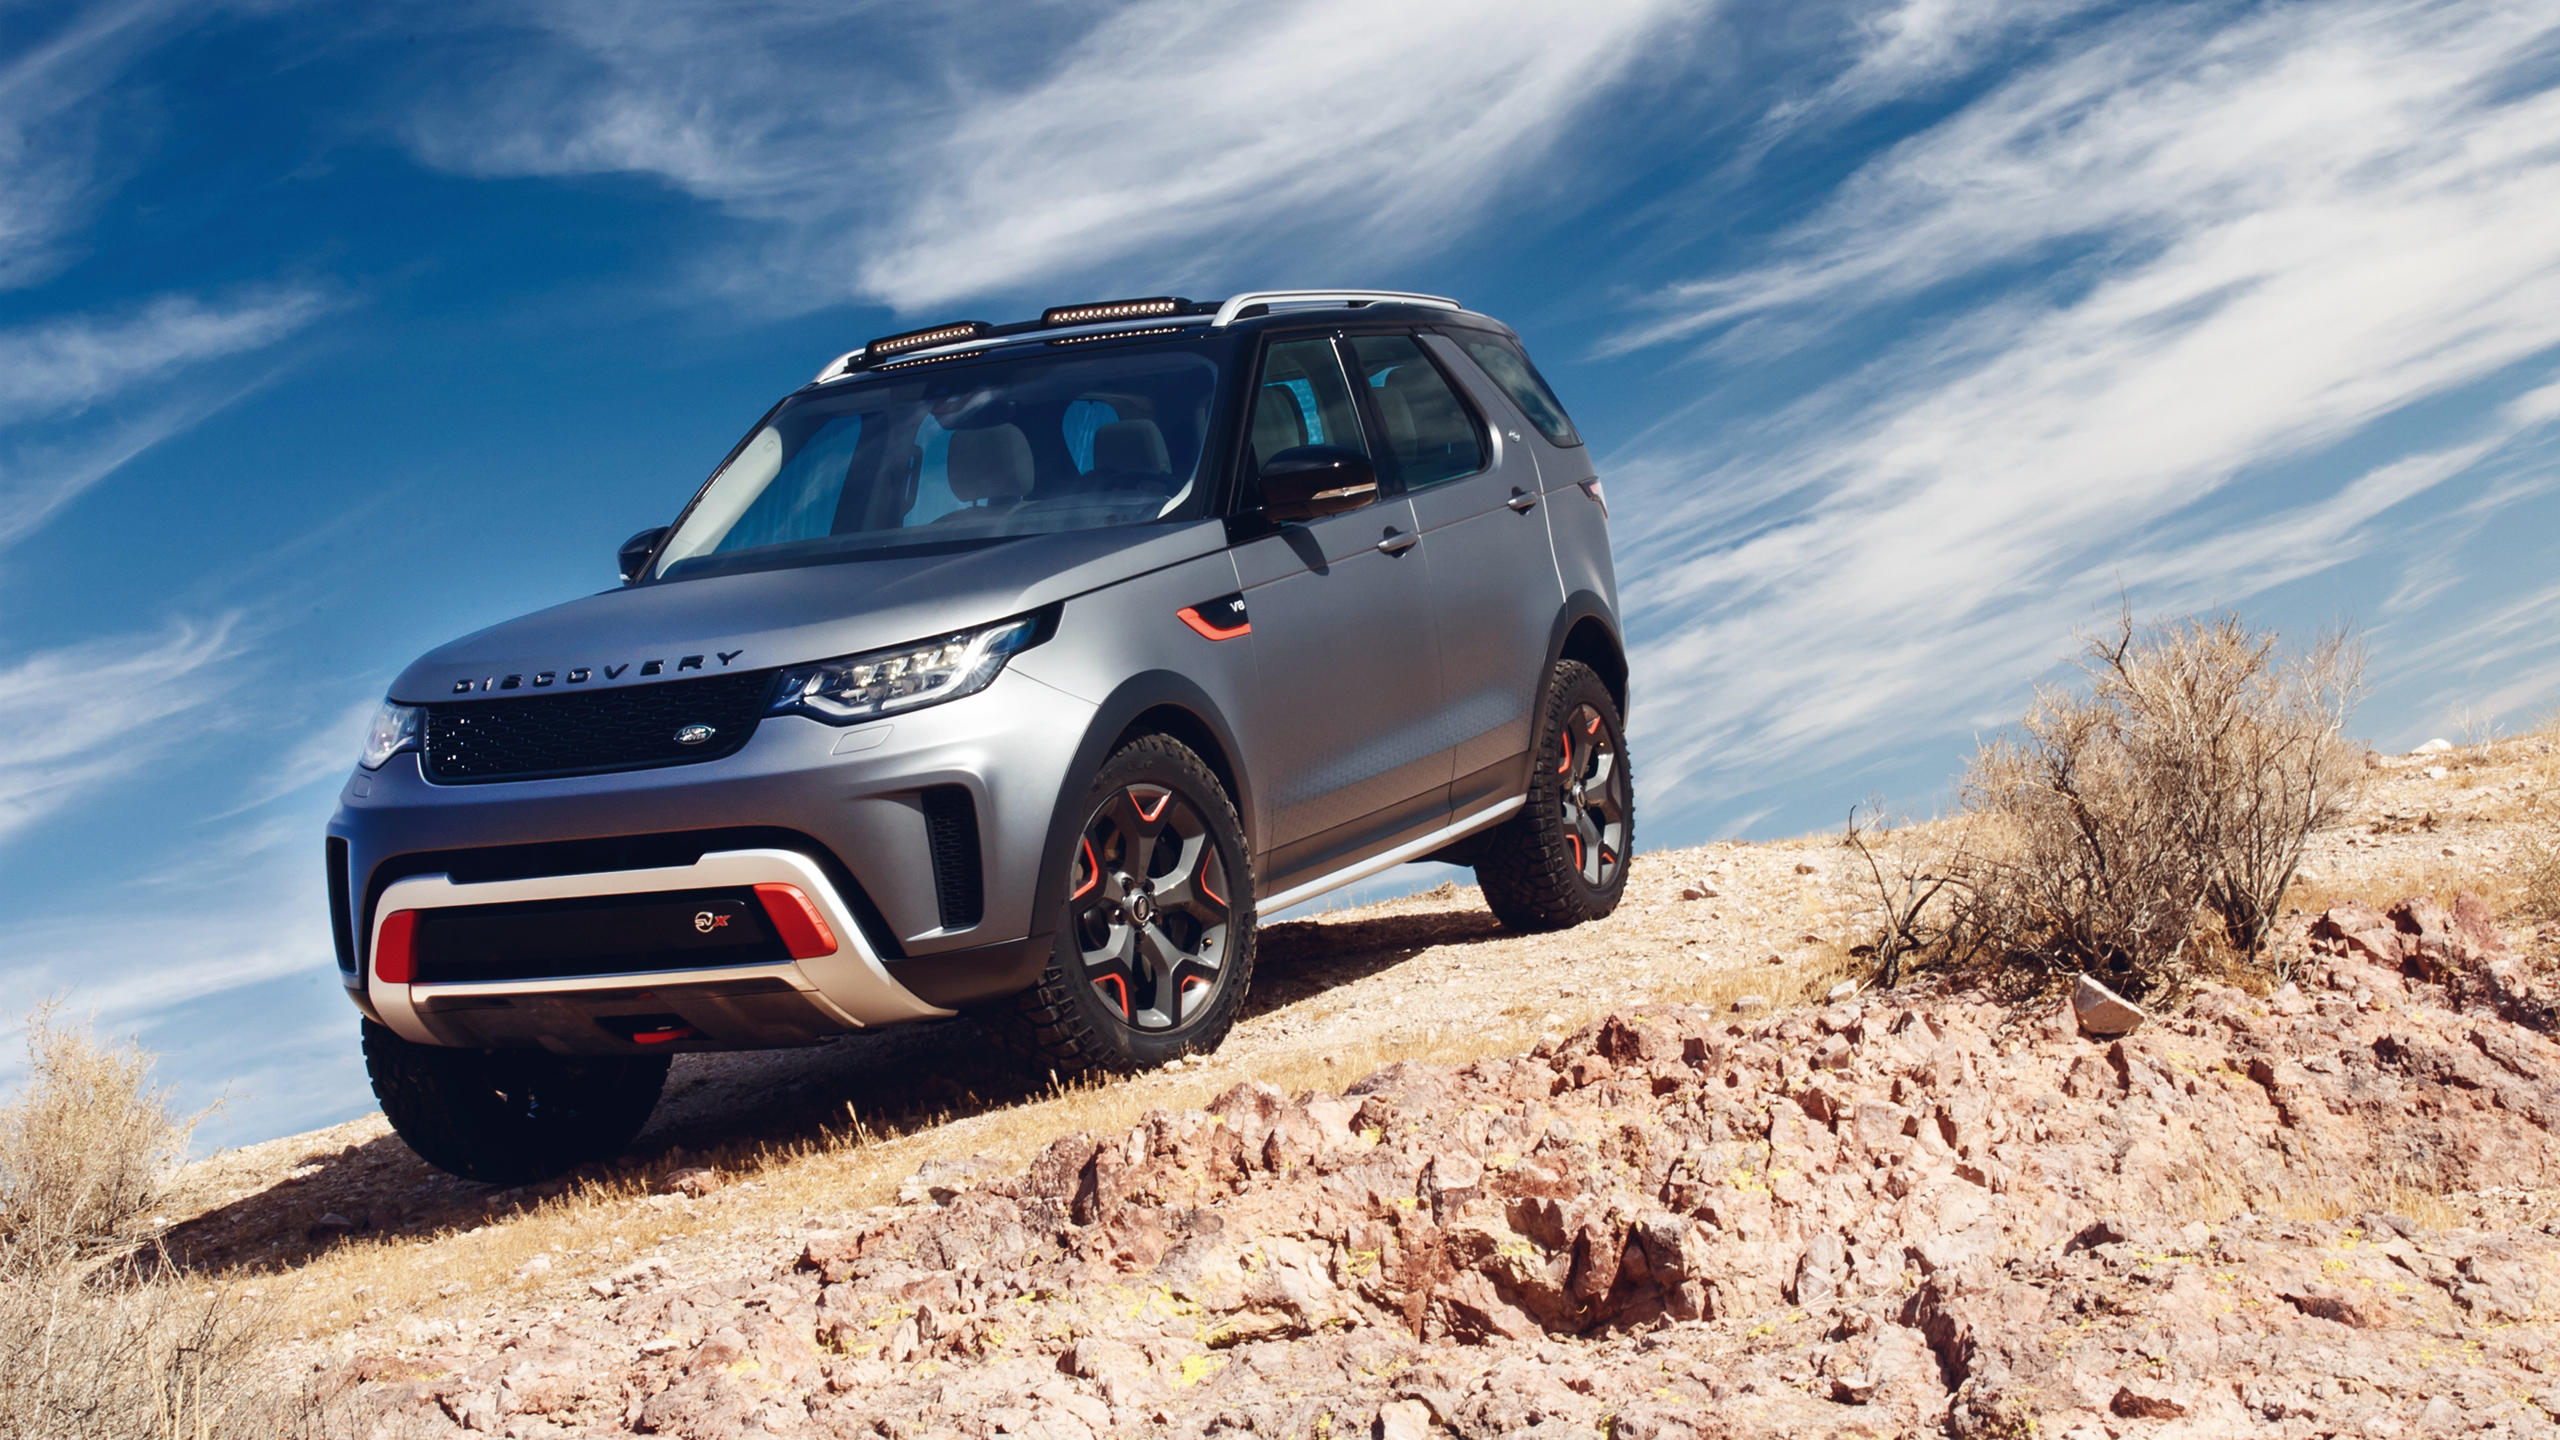 Land Rover Discovery Svx Wallpaper On